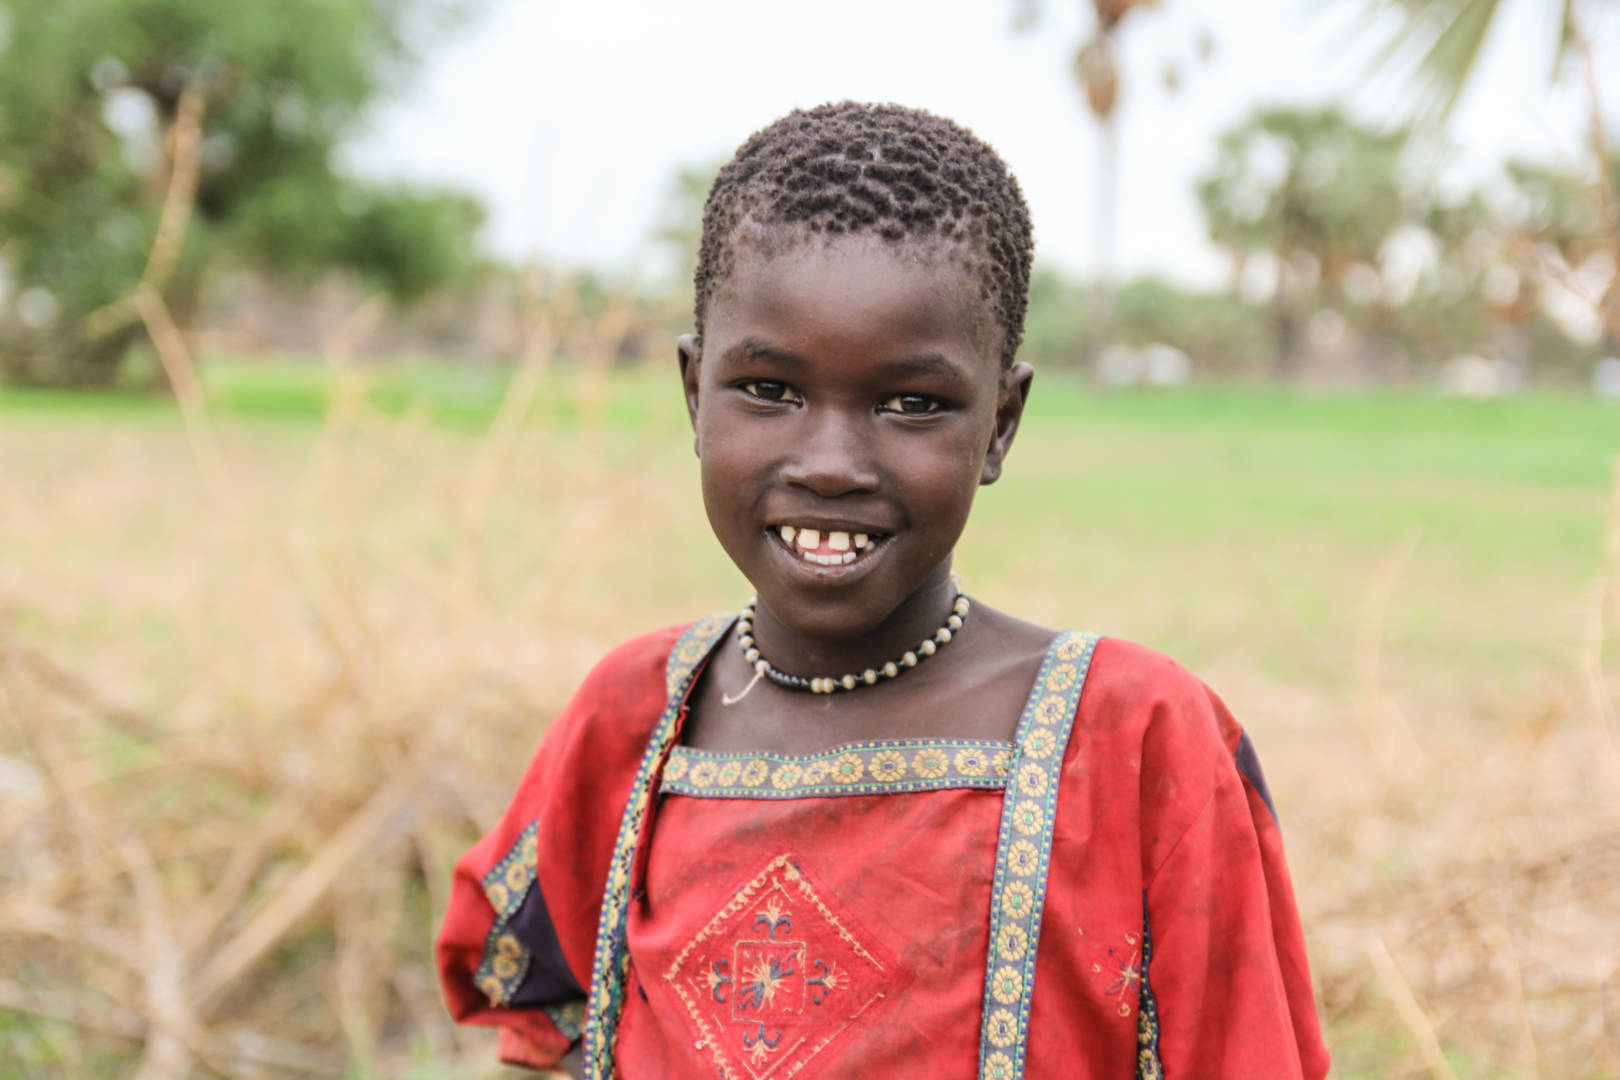 Pray for South Sudan: Join us in praying over the people of South Sudan, where armed conflict and food shortages make it very difficult to live right now.